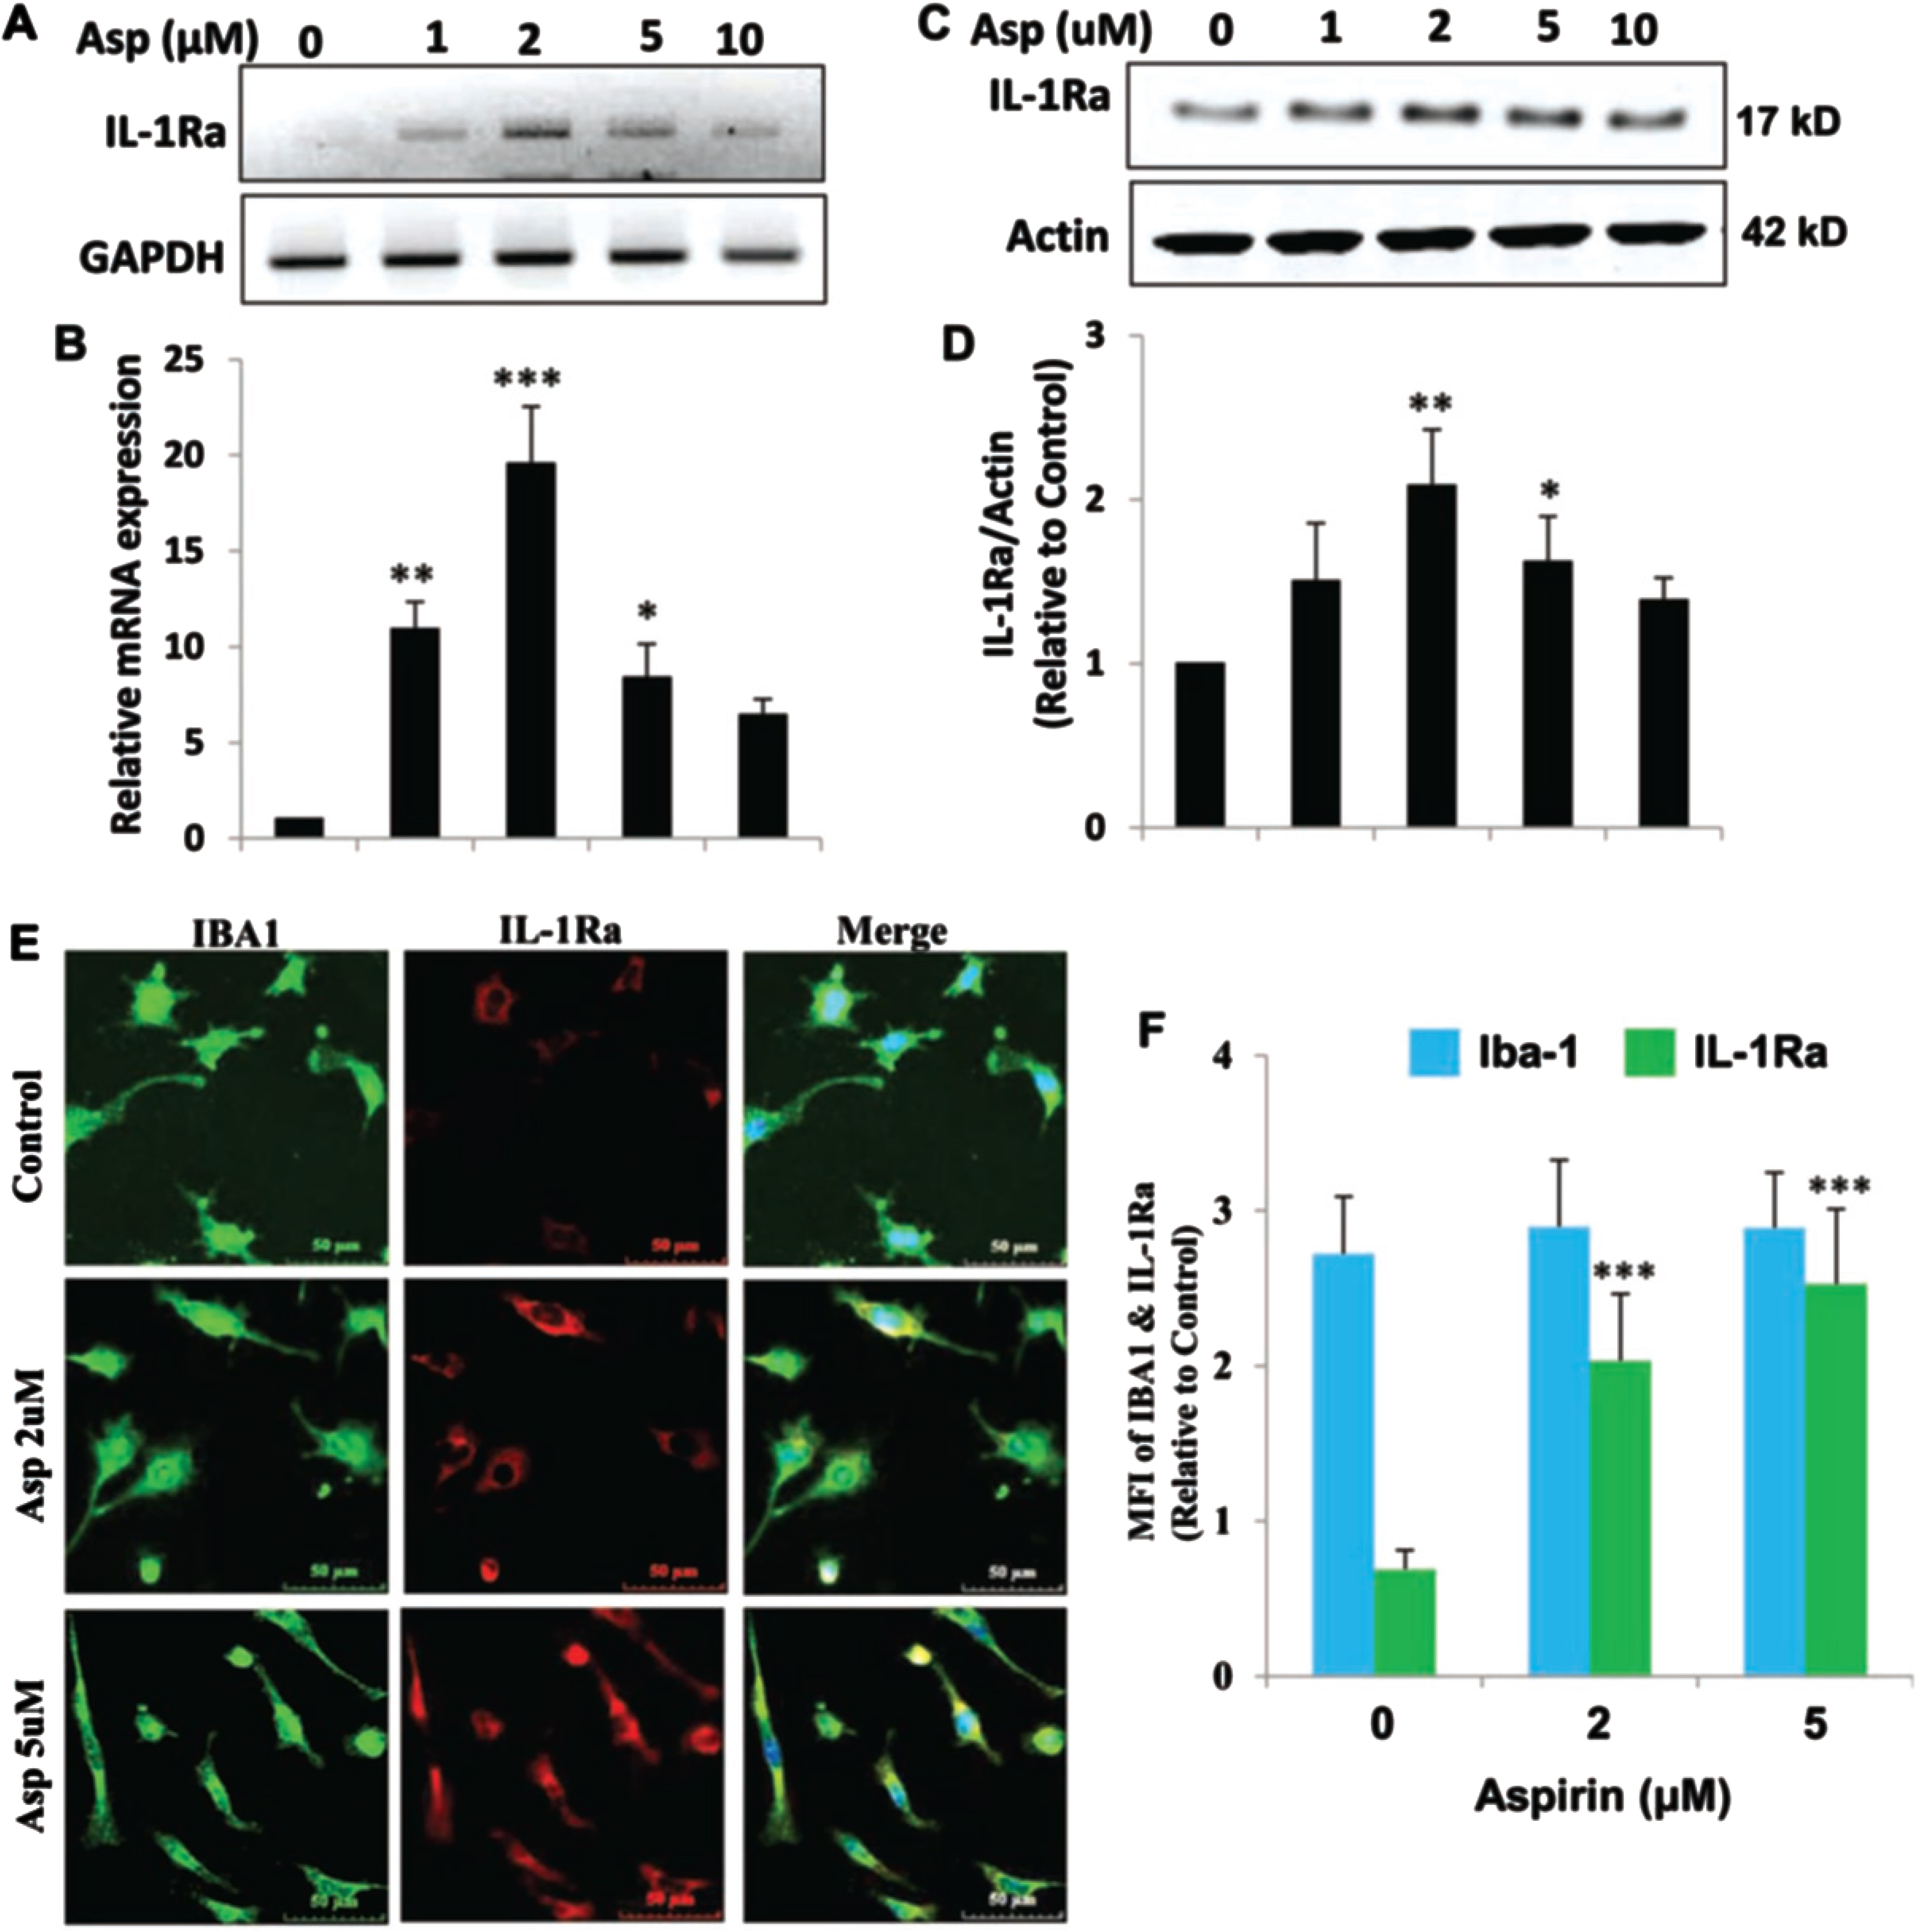 Aspirin upregulates IL-1Ra in mouse BV-2 microglial cells. A, B) BV-2 cells were treated with 1, 2, 5, and 10μM of aspirin for 2 h under serum-free condition. An increase in IL-1Ra mRNA was significant with p < 0.001 by one-way ANOVA. C, D) An increase in IL-1Ra protein by aspirin was significant at 2μM with p < 0.01 by one-way ANOVA. E, F) Immunostaining and quantification of IL-1Ra showed significance at the p < 0.001 level with 2 and 5μM aspirin by one-way ANOVA. On the other hand, no change in Iba-1 was observed at these doses of aspirin. Results are mean±SEM of three experiments. *p < 0.05, **p < 0.01 and ***p < 0.001.